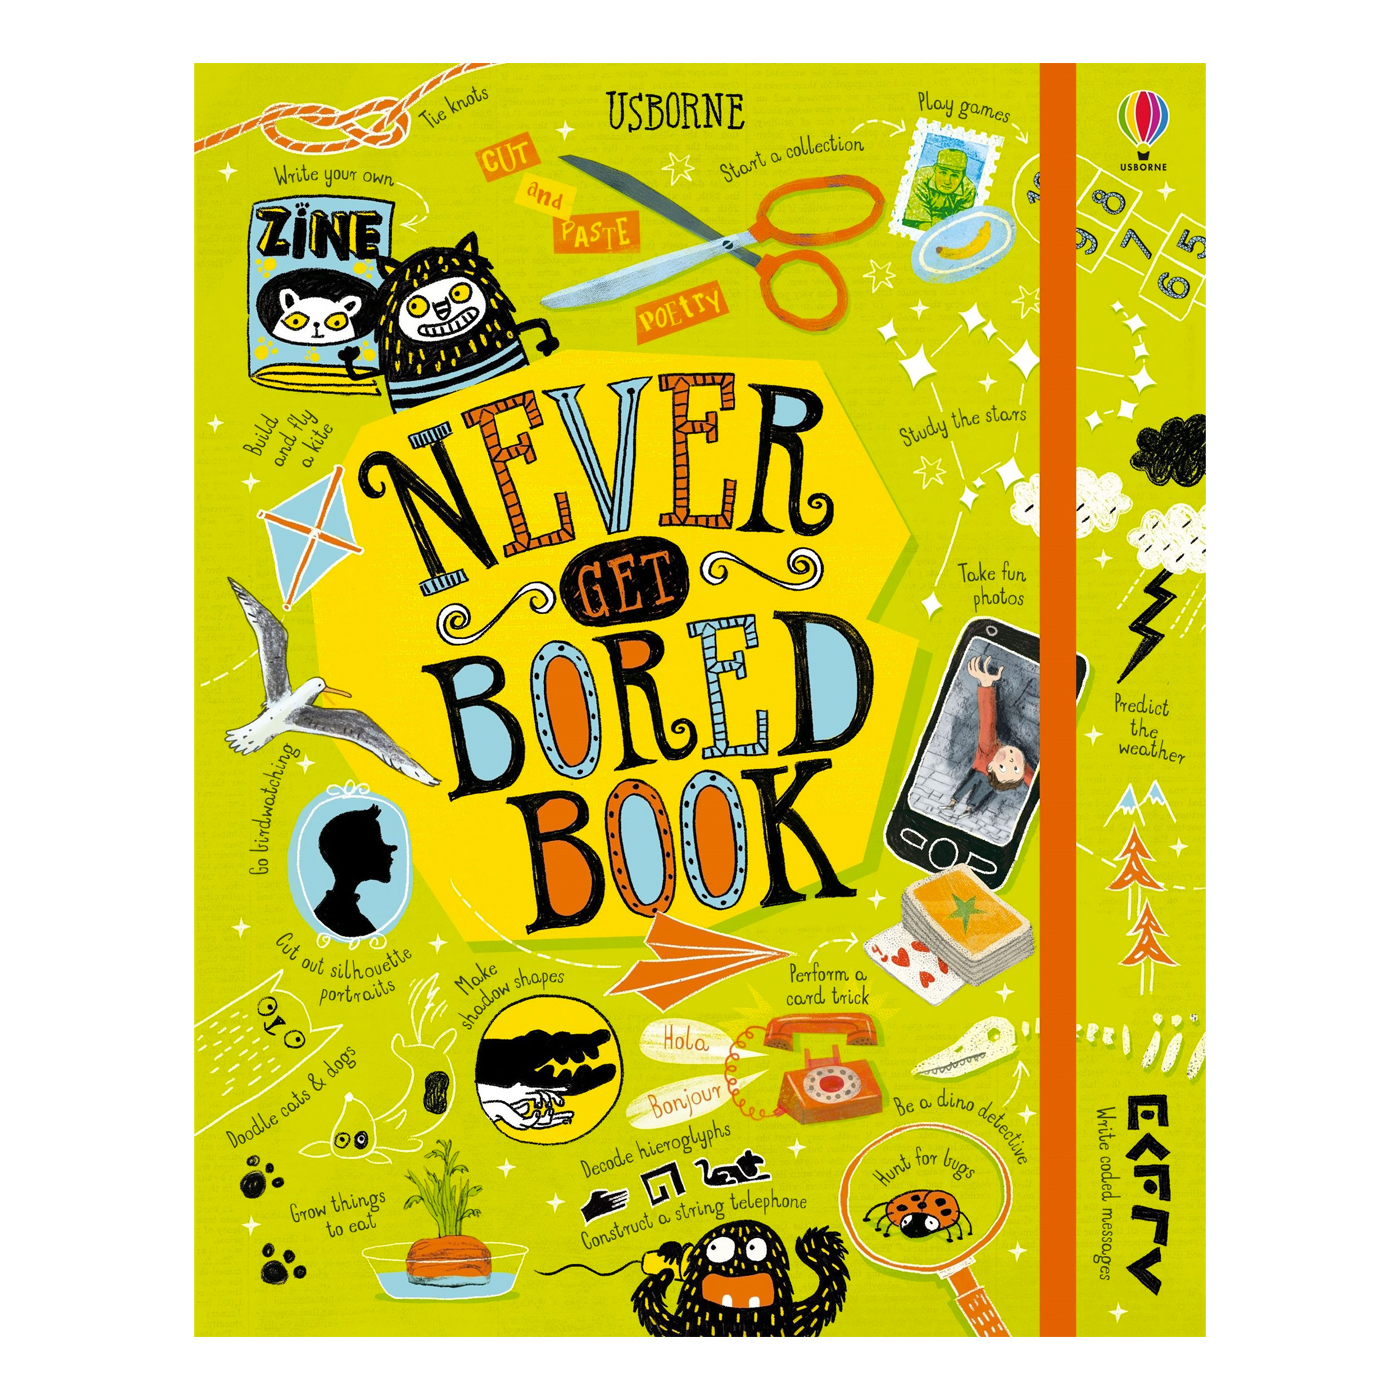  Never Get Bored Book